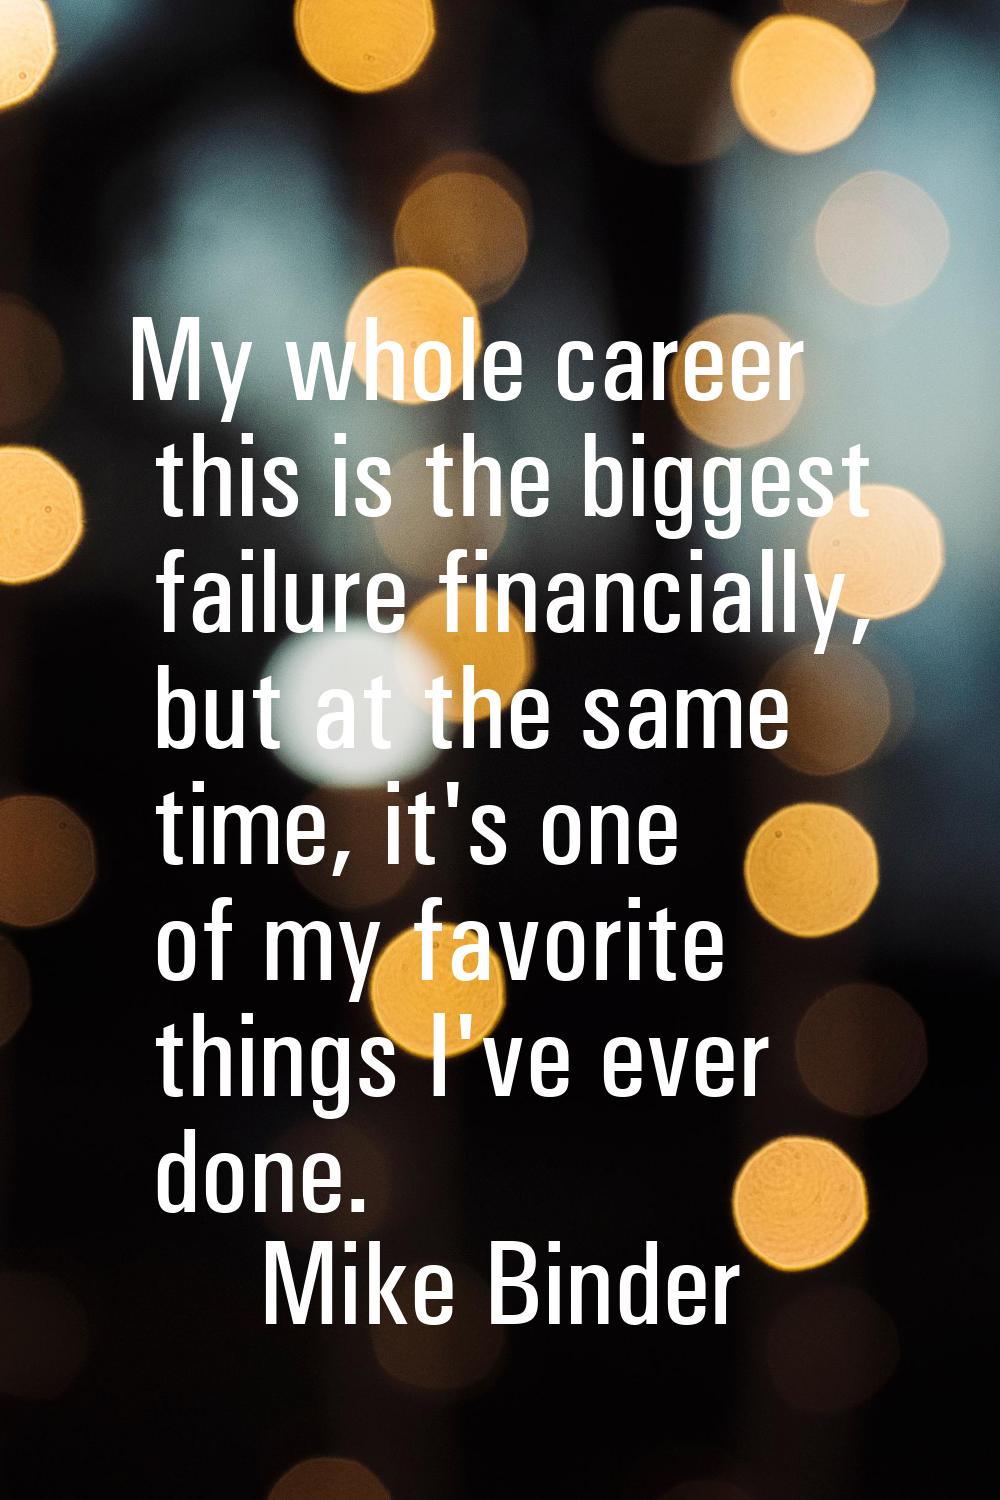 My whole career this is the biggest failure financially, but at the same time, it's one of my favor